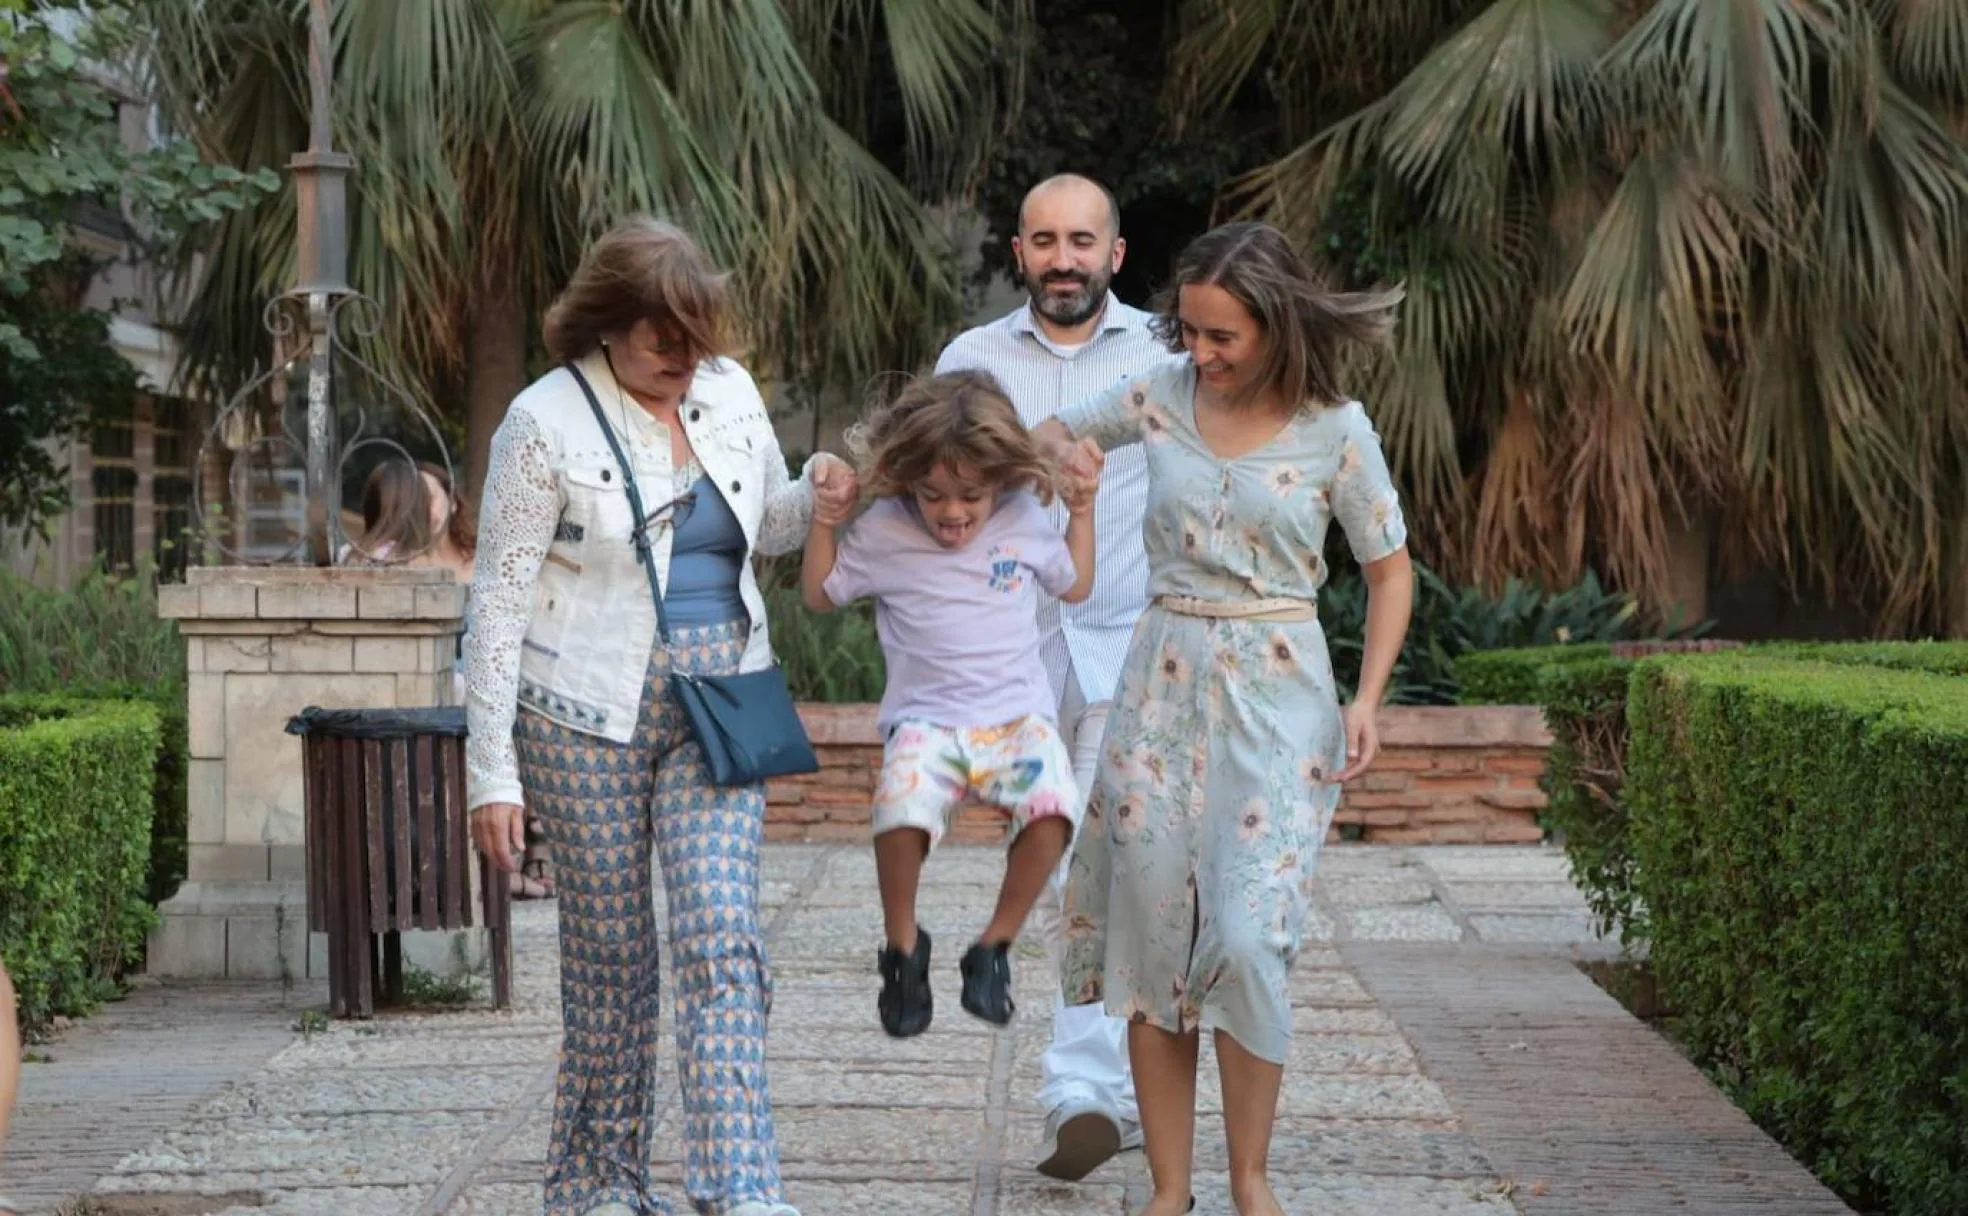 Leo with his family.